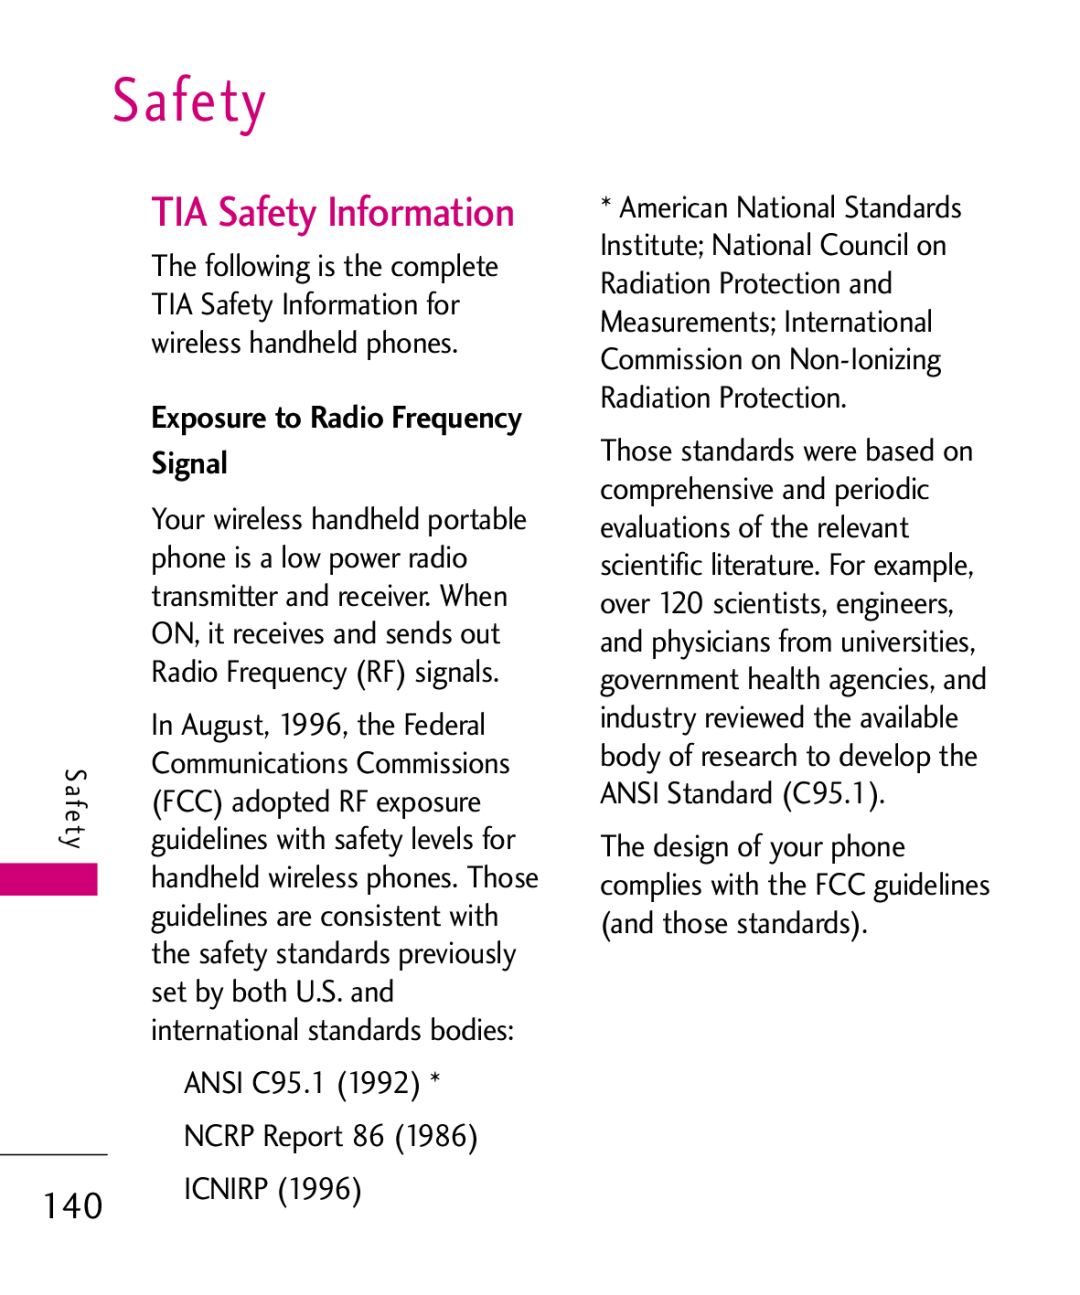 LG Electronics MMBB0379501 Signal, TIA Safety Information for, wireless handheld phones, phone is a low power radio 